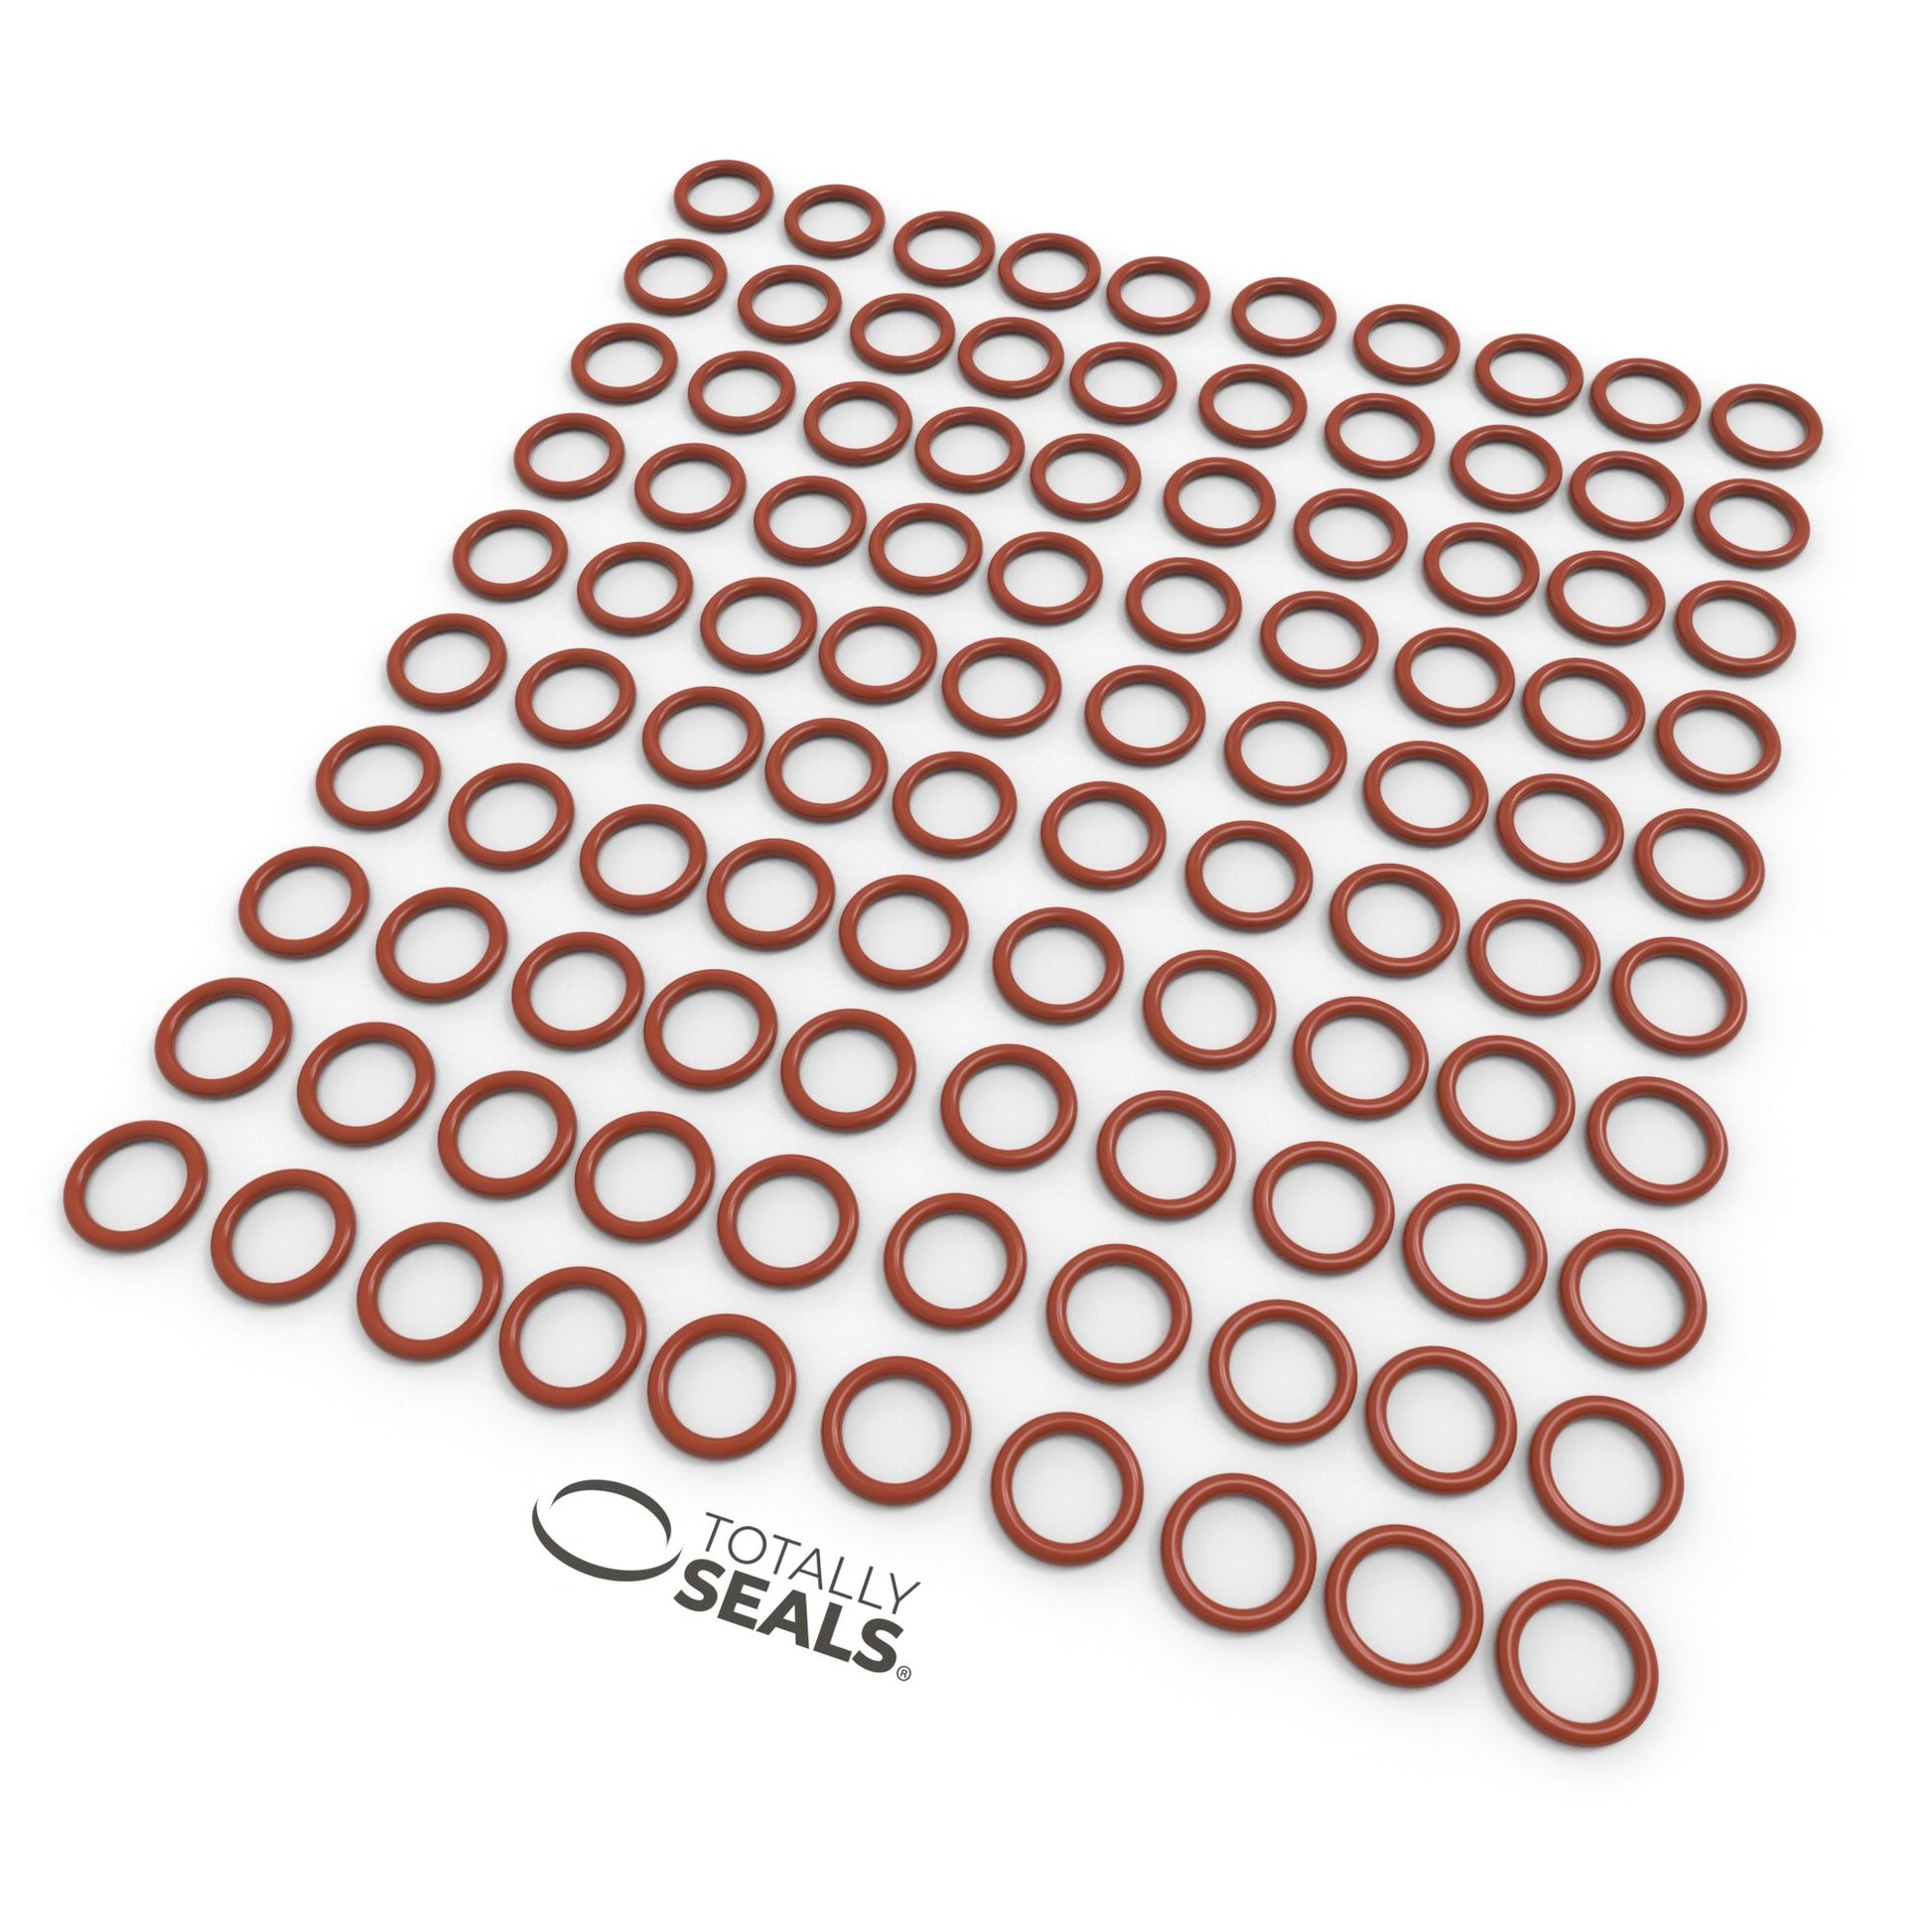 7mm x 2mm (11mm OD) Silicone O-Rings - Totally Seals®